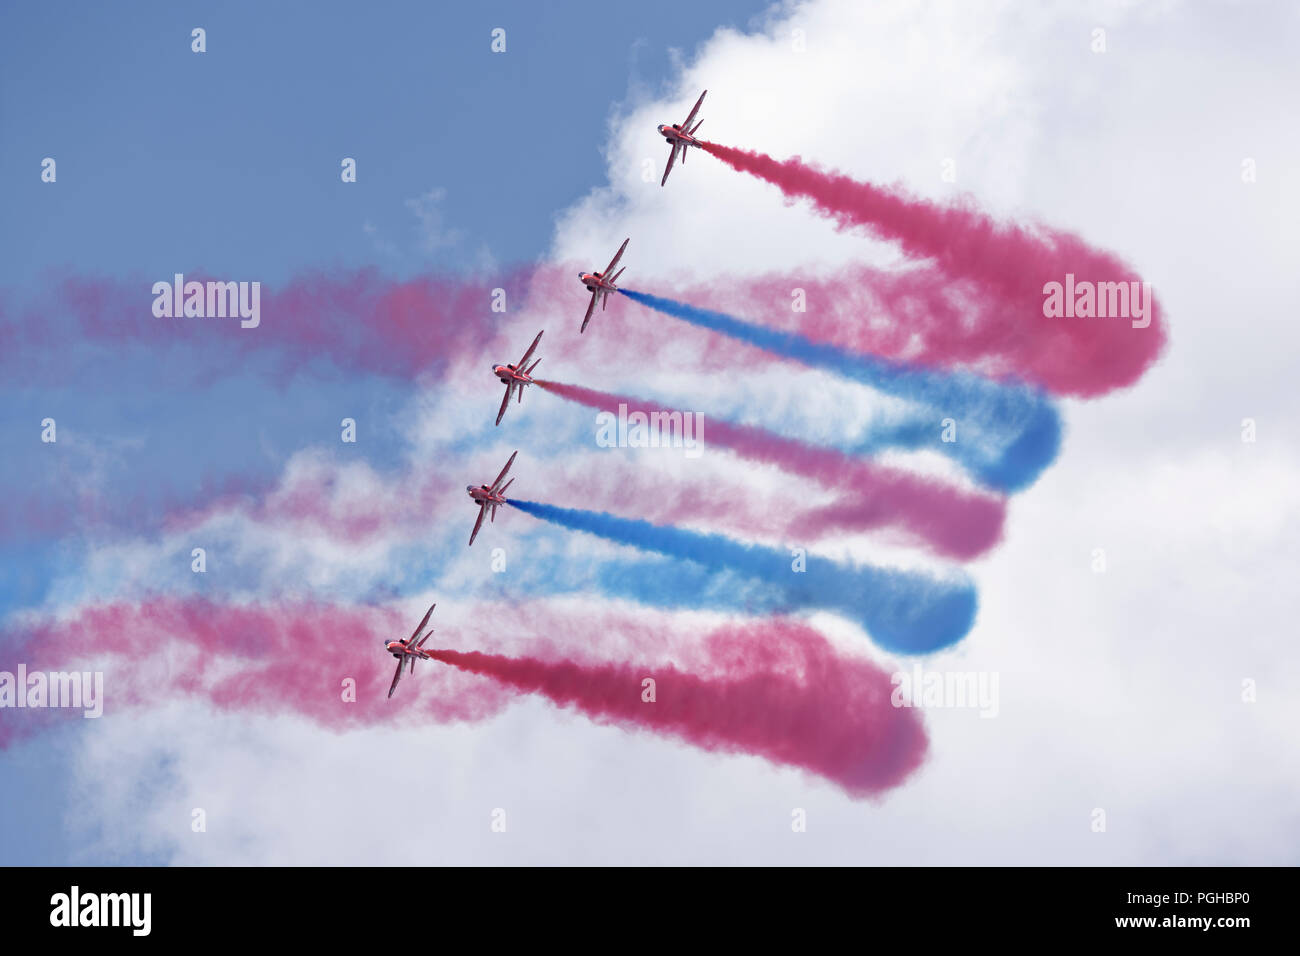 The British Royal Air Force Red Arrows Military Aerobatic Display team Enid section of 5 Hawk Jet Trainers display at the RIAT Stock Photo